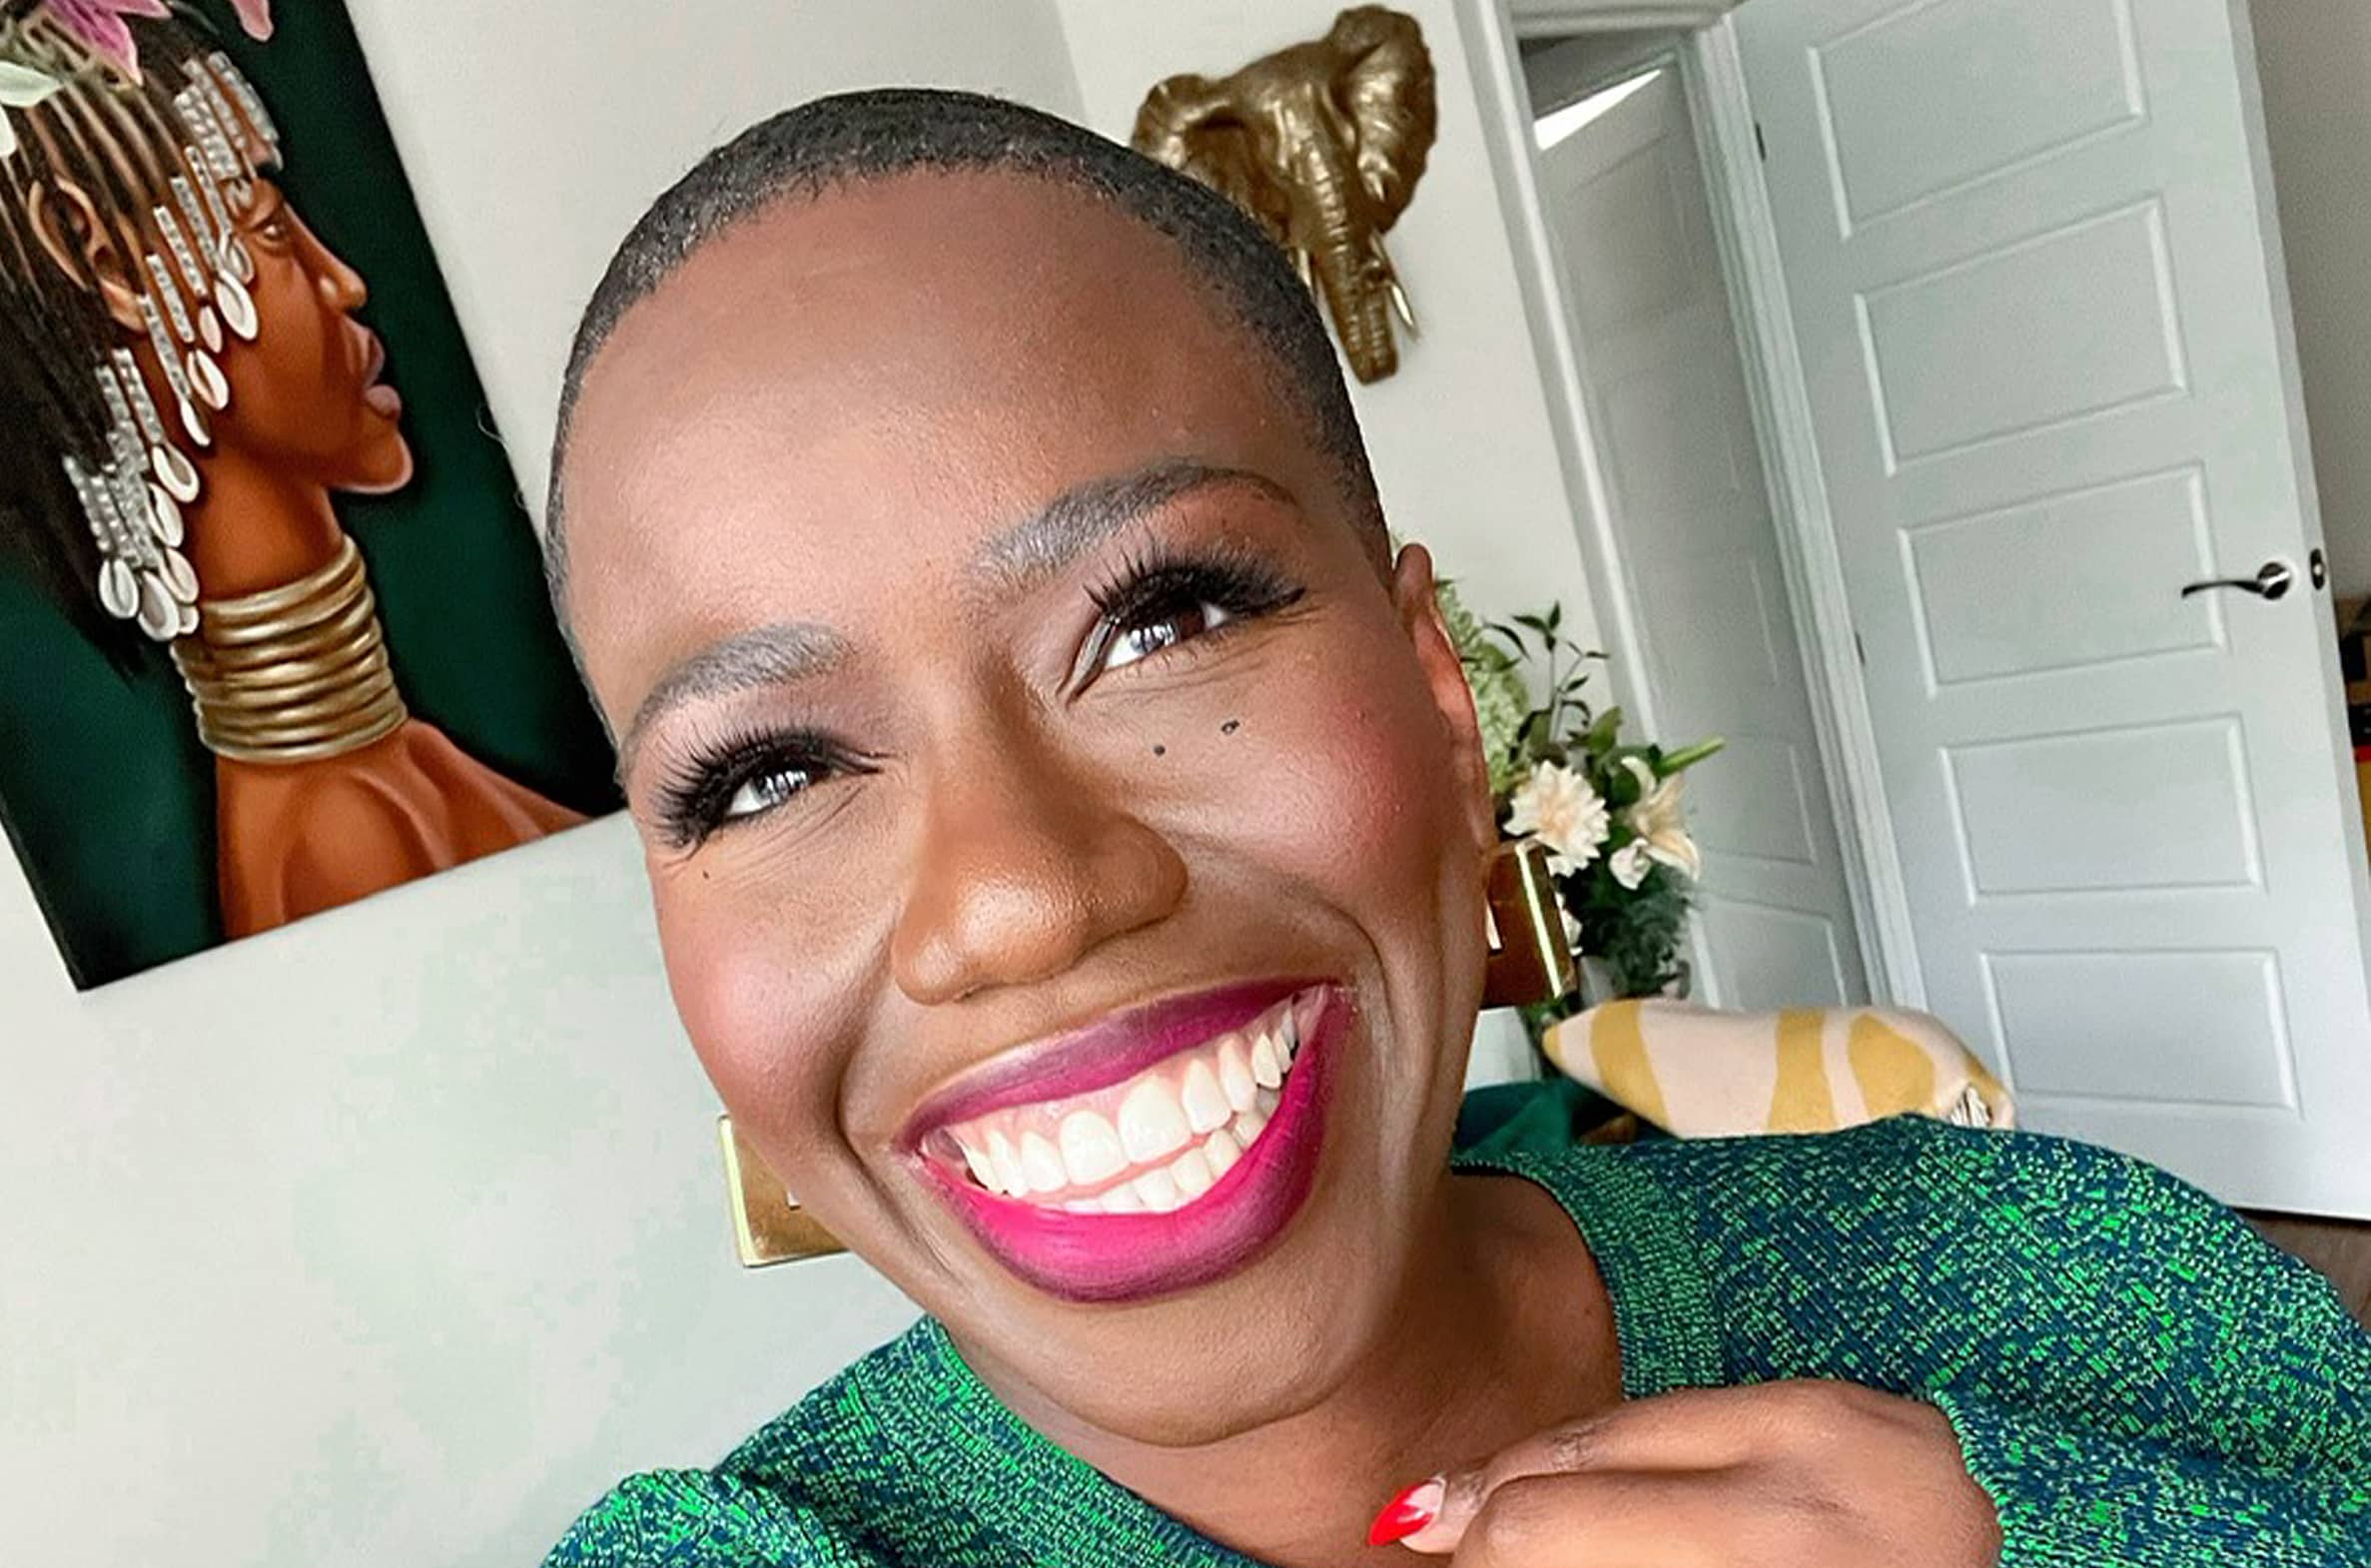 Candice brathwaite on returning to work after mat leave and exercising for joy – not weight loss